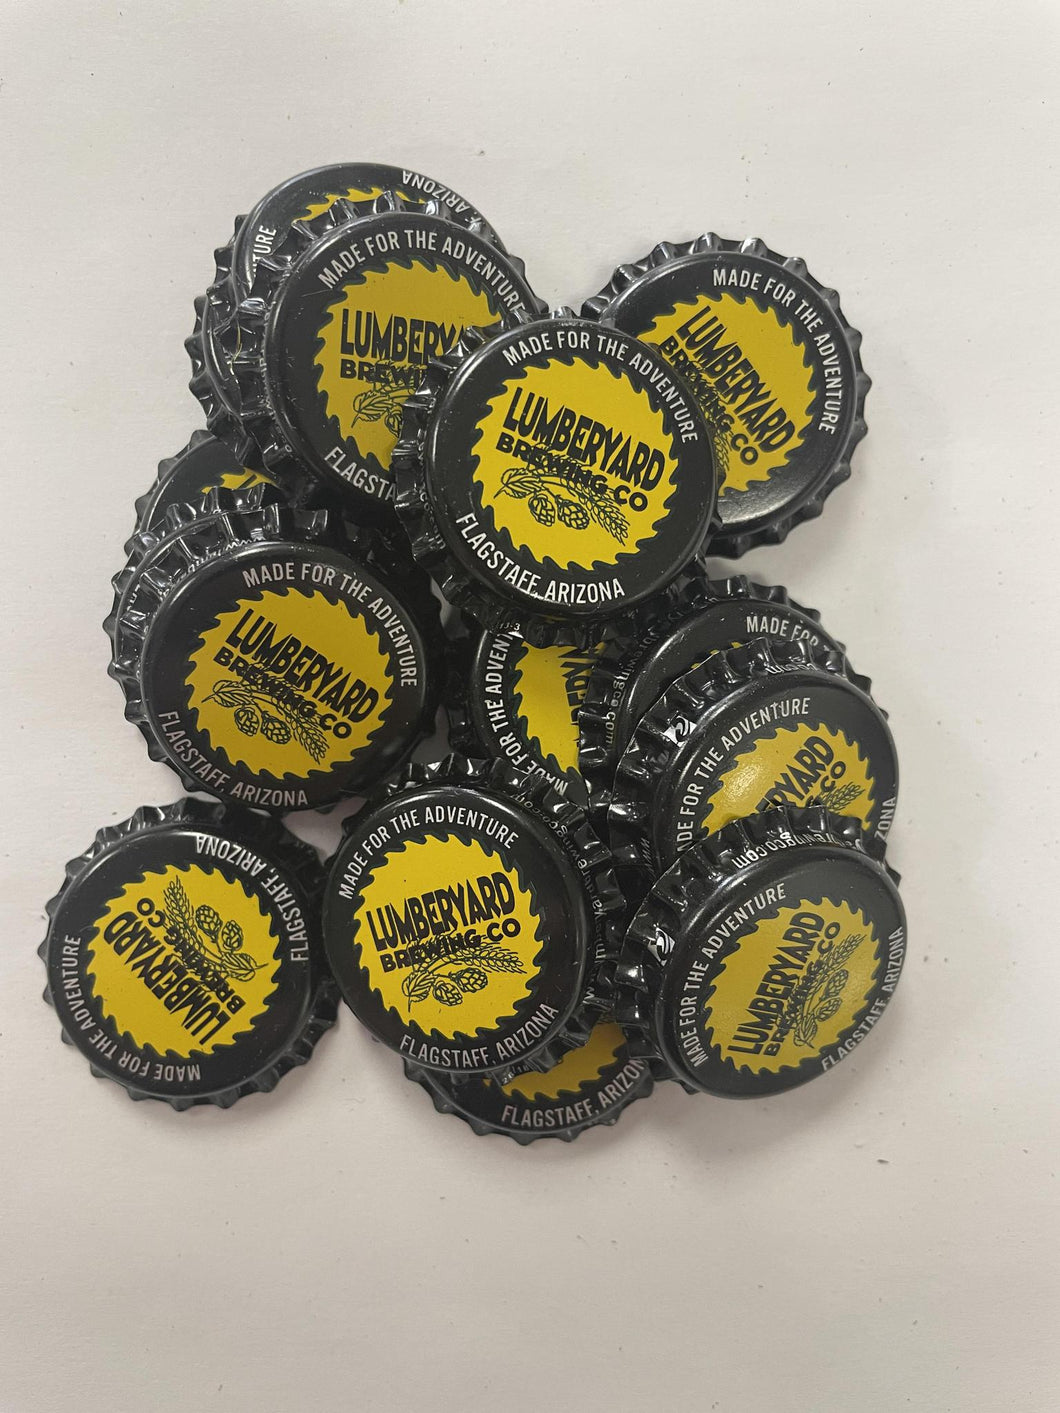 Lumberyard Brewing Co - Bottle Caps - about 60 pieces